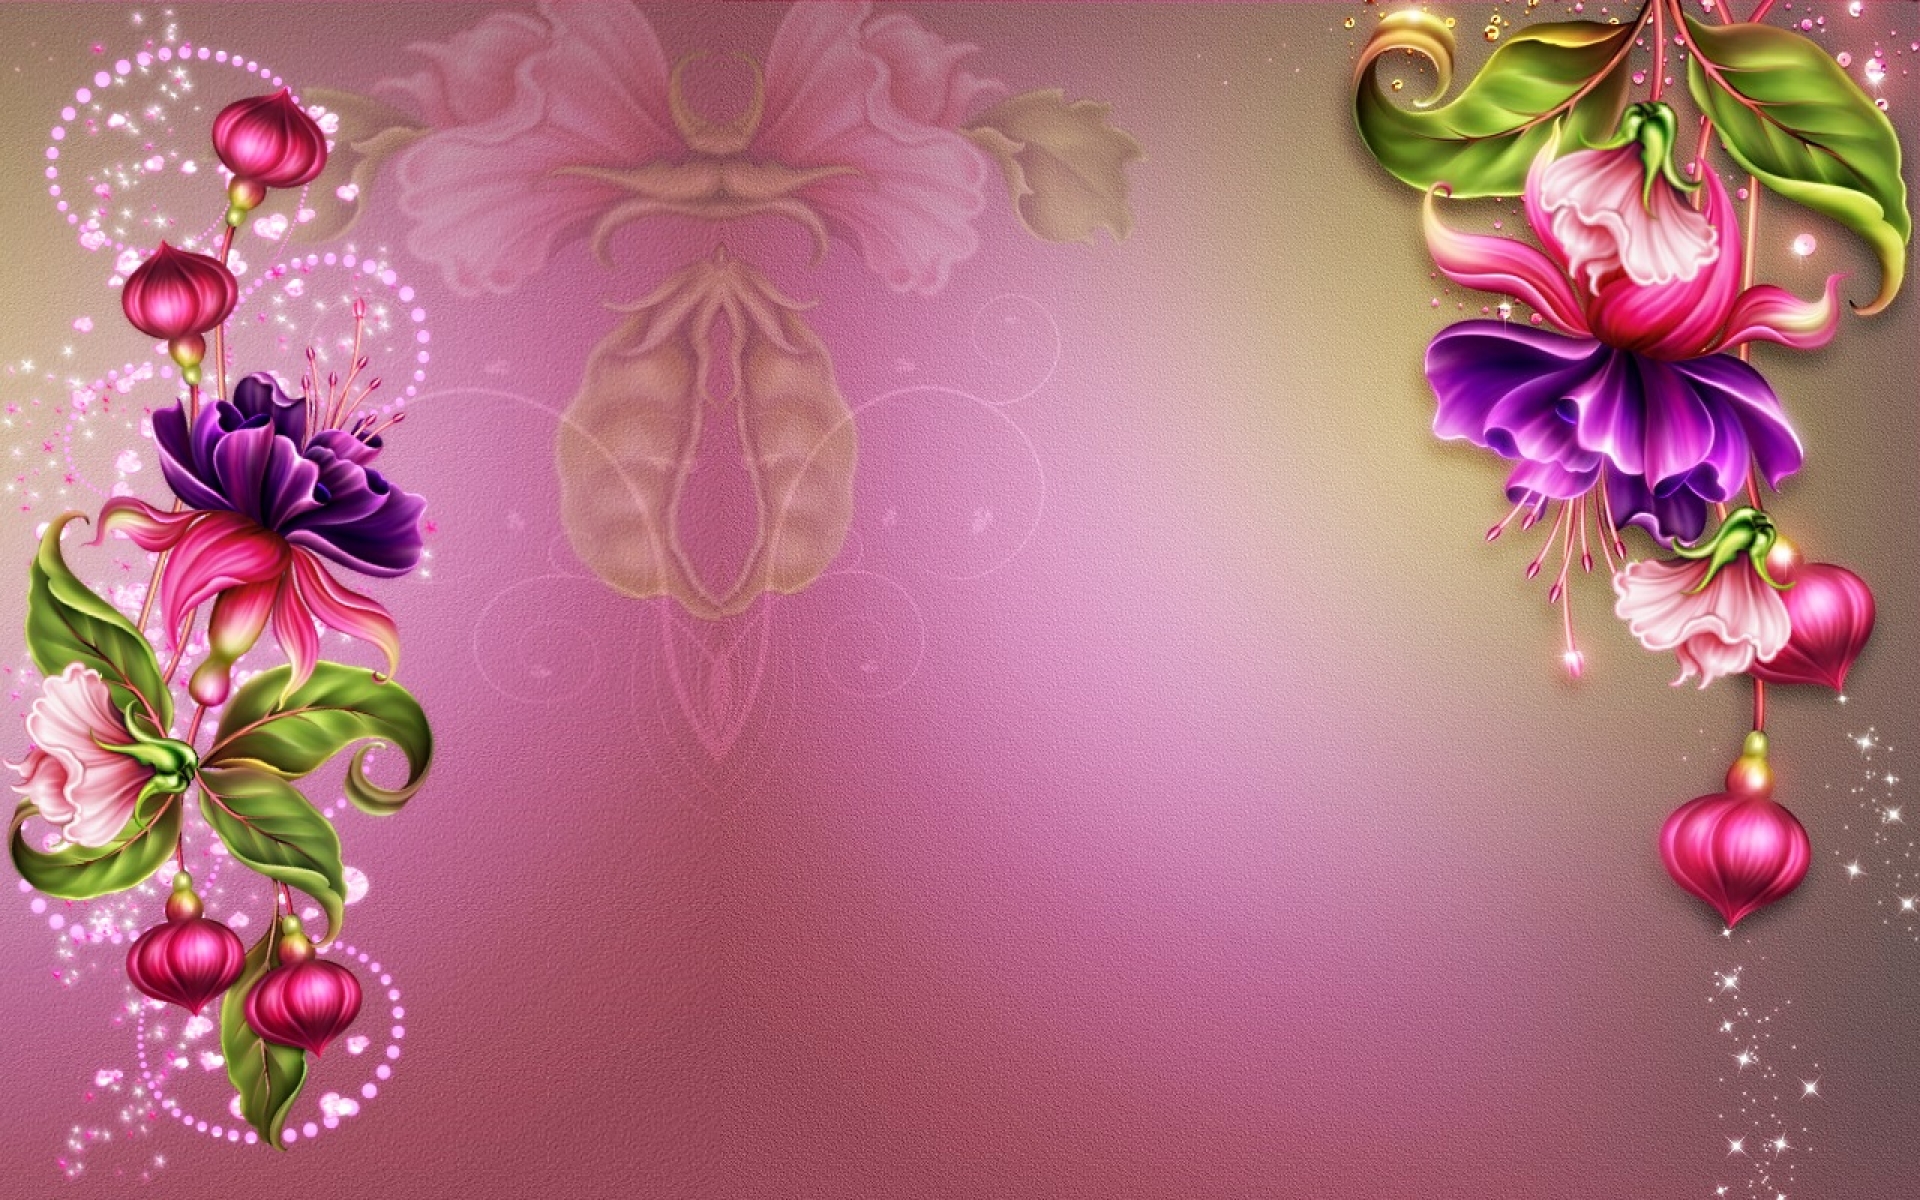 Fuchsia HD Wallpapers and Backgrounds